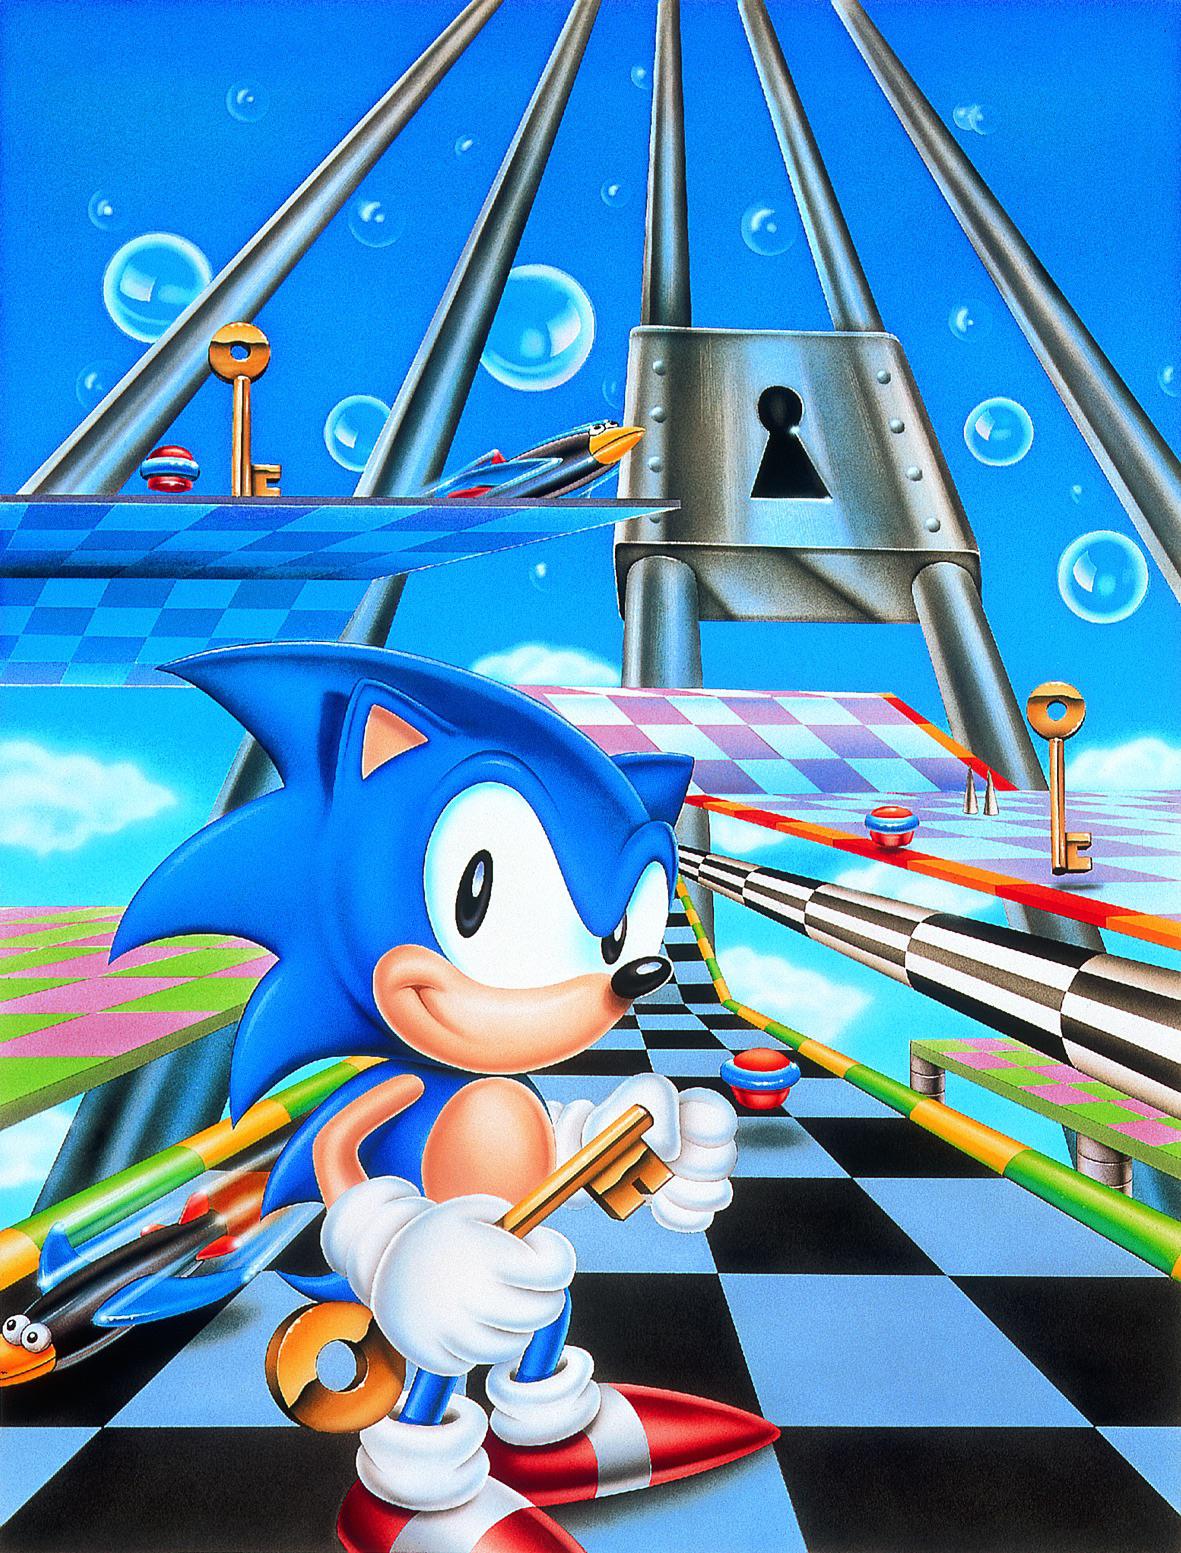 A key unlocks the keyhole in the wall behind Sonic. - Sonic